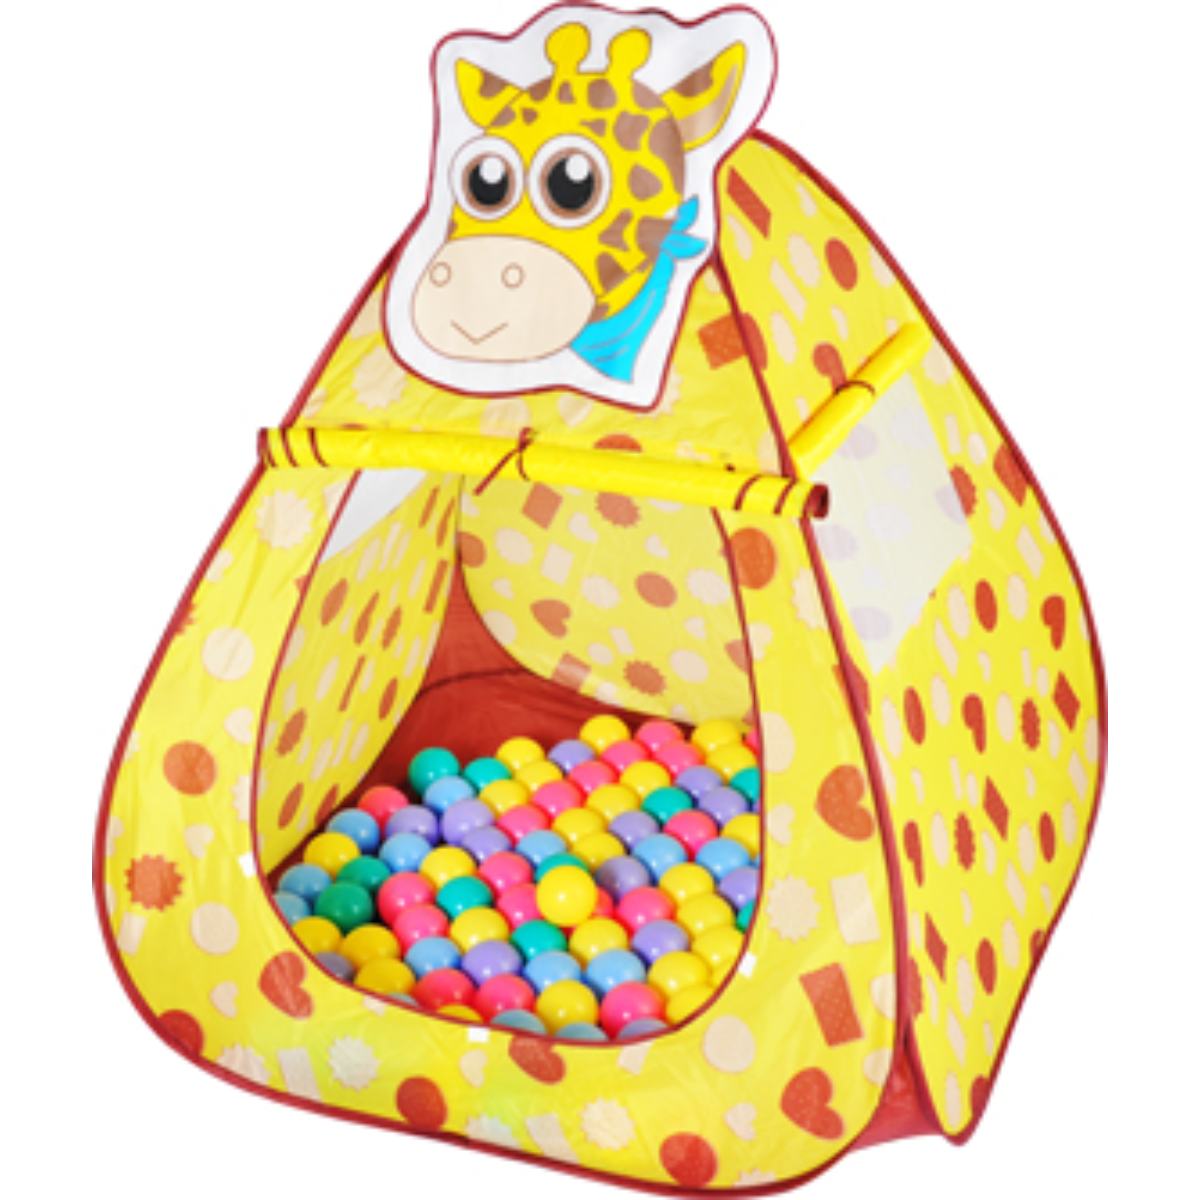 ching-ching-giraffe-house-with-100pcs-colorful-balls